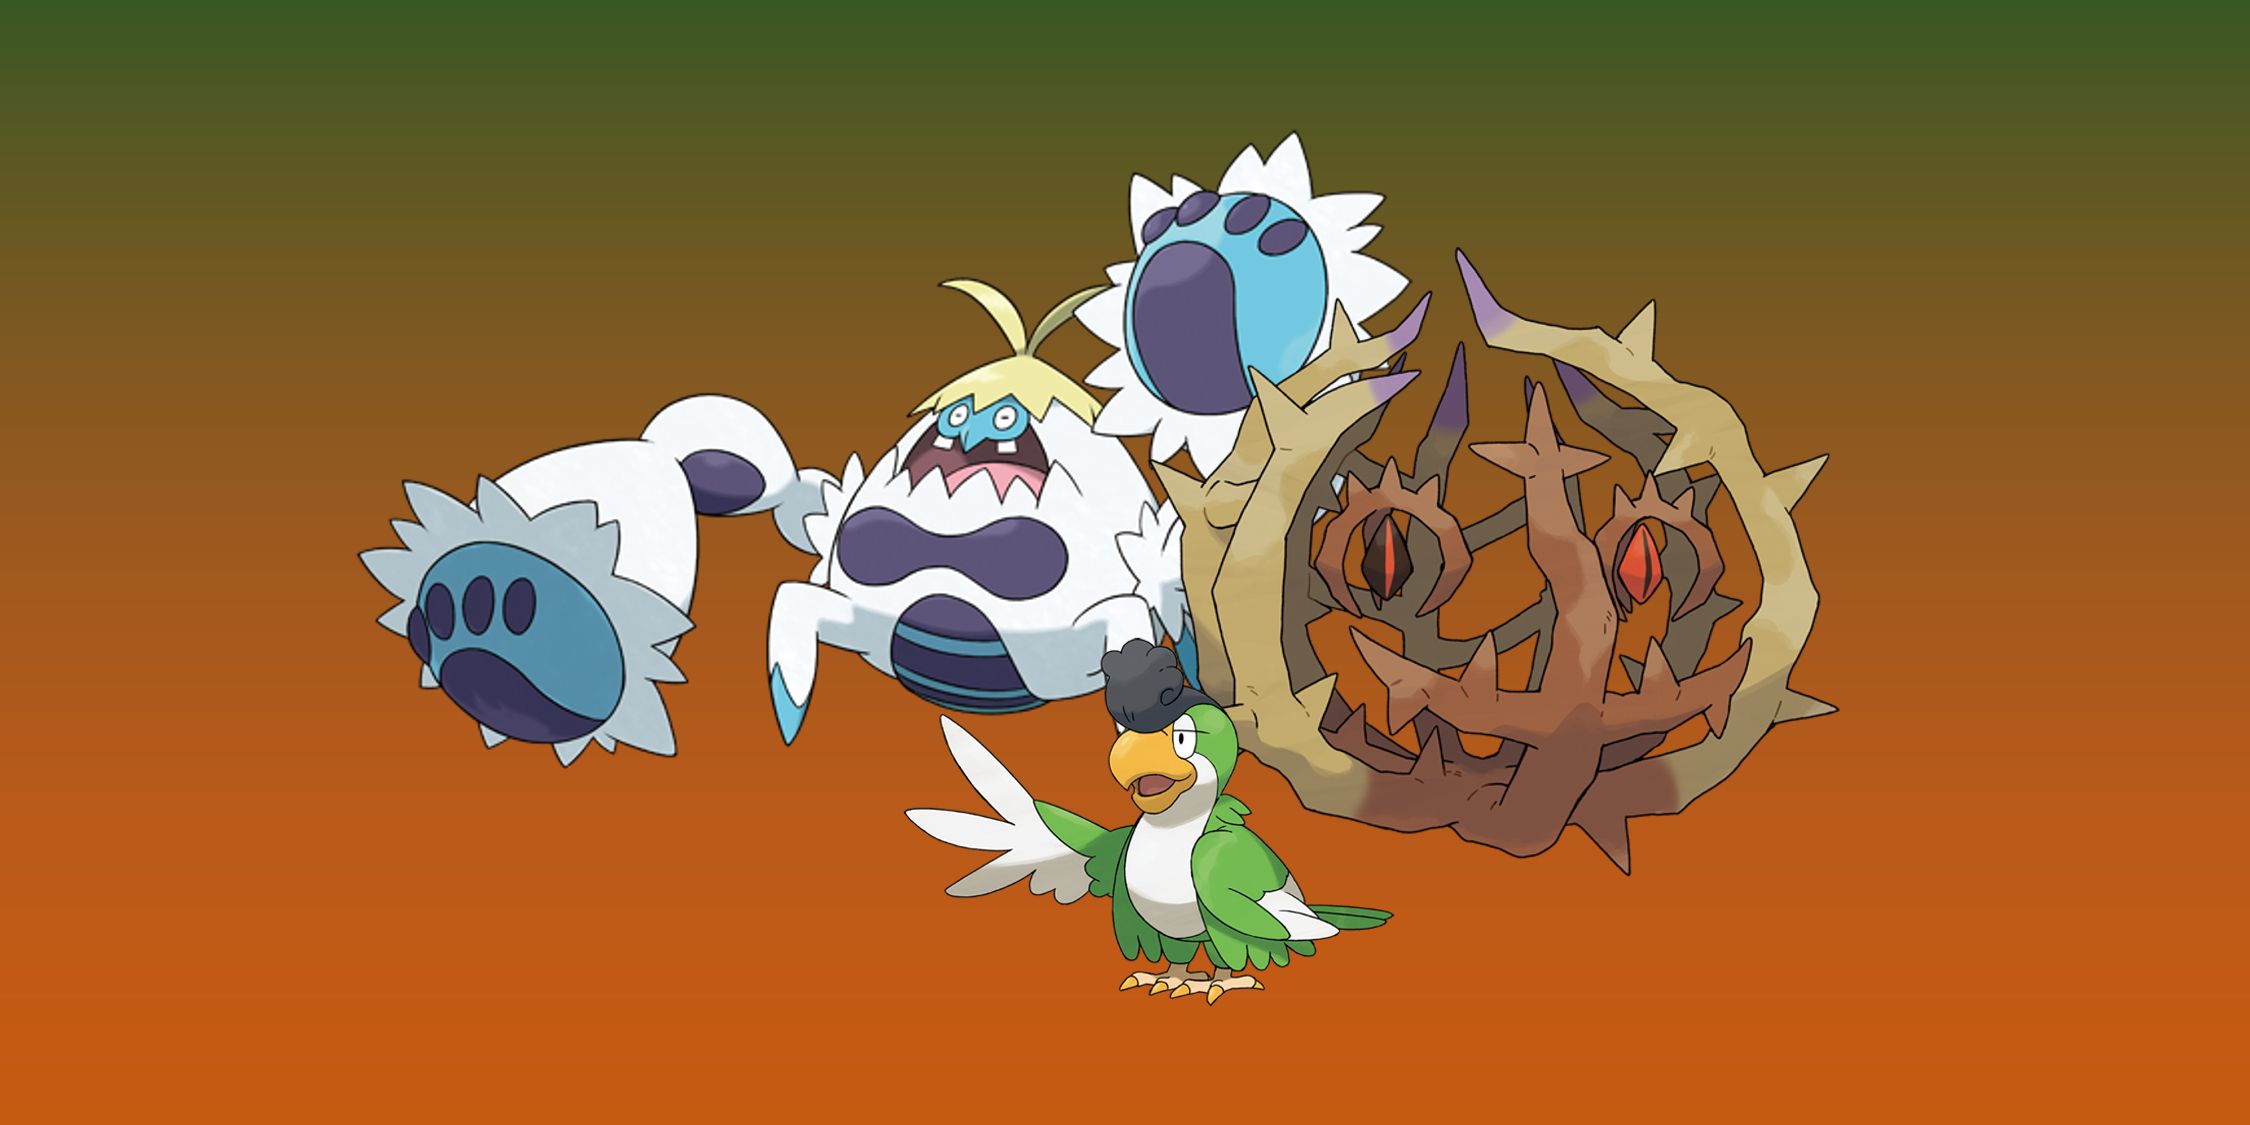 Pokémon with 12-letter names: Crabinominable, Brambleghast, Scoutabilly